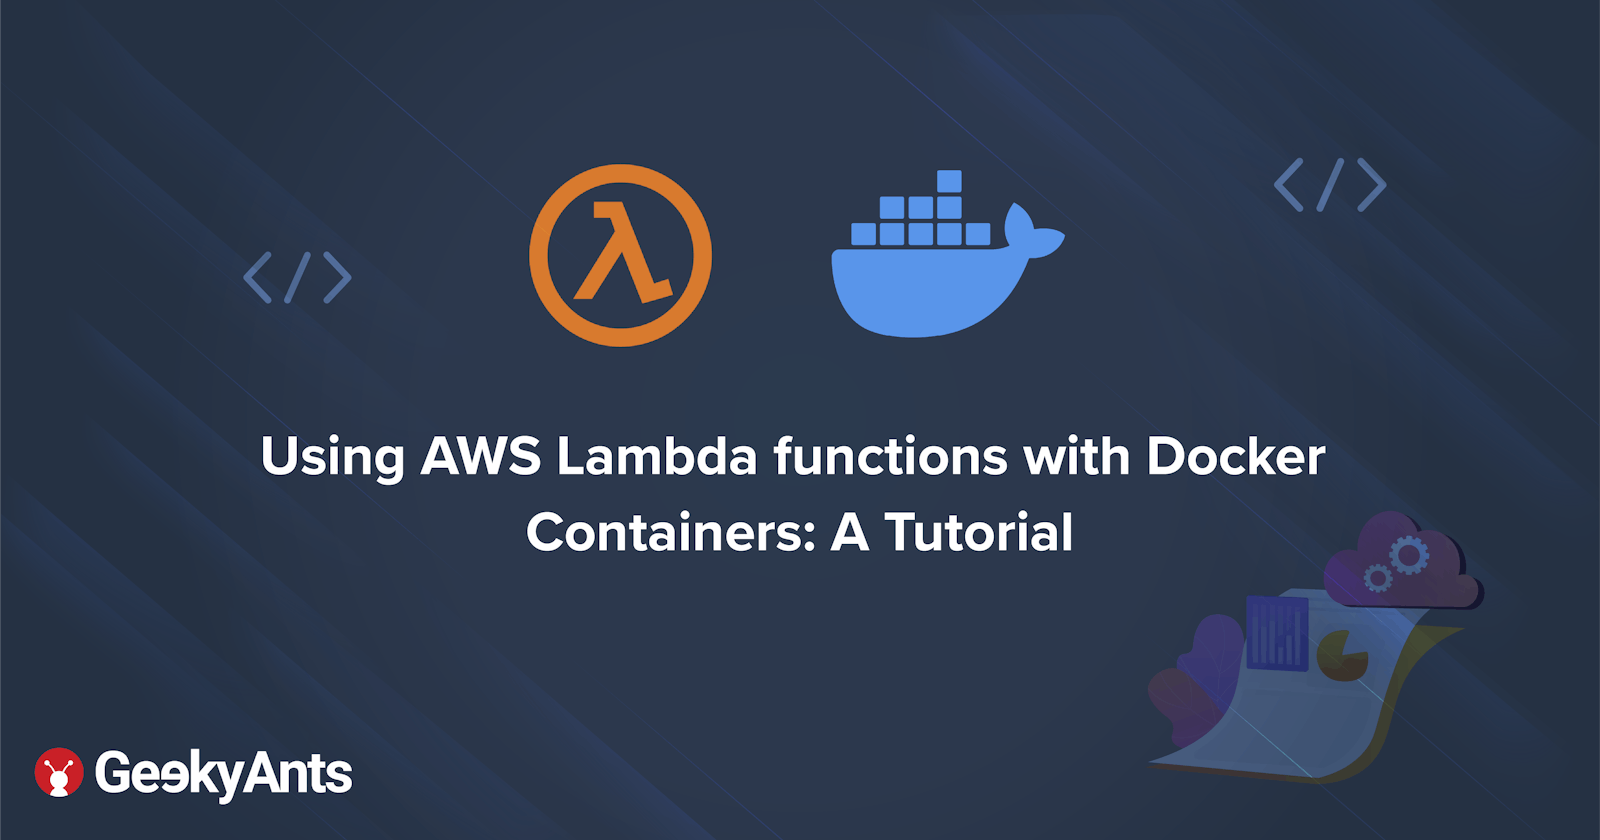 Using AWS Lambda functions with Docker Containers: A Tutorial